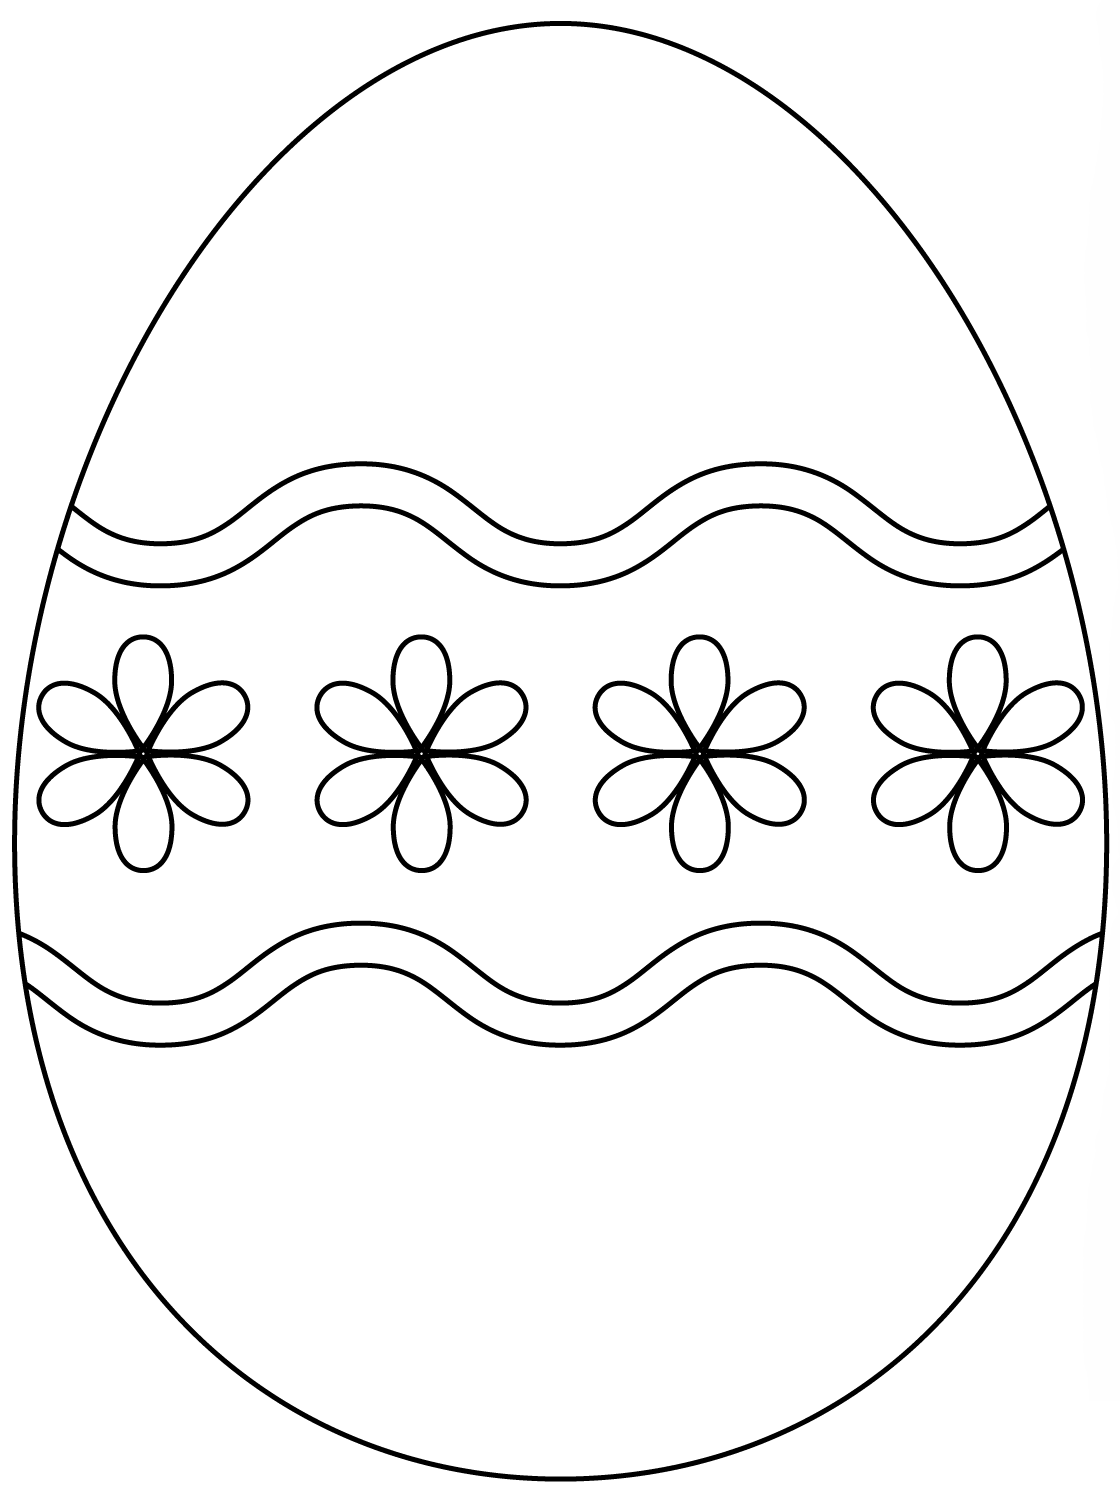 Easter Egg With Simple Flower Pattern